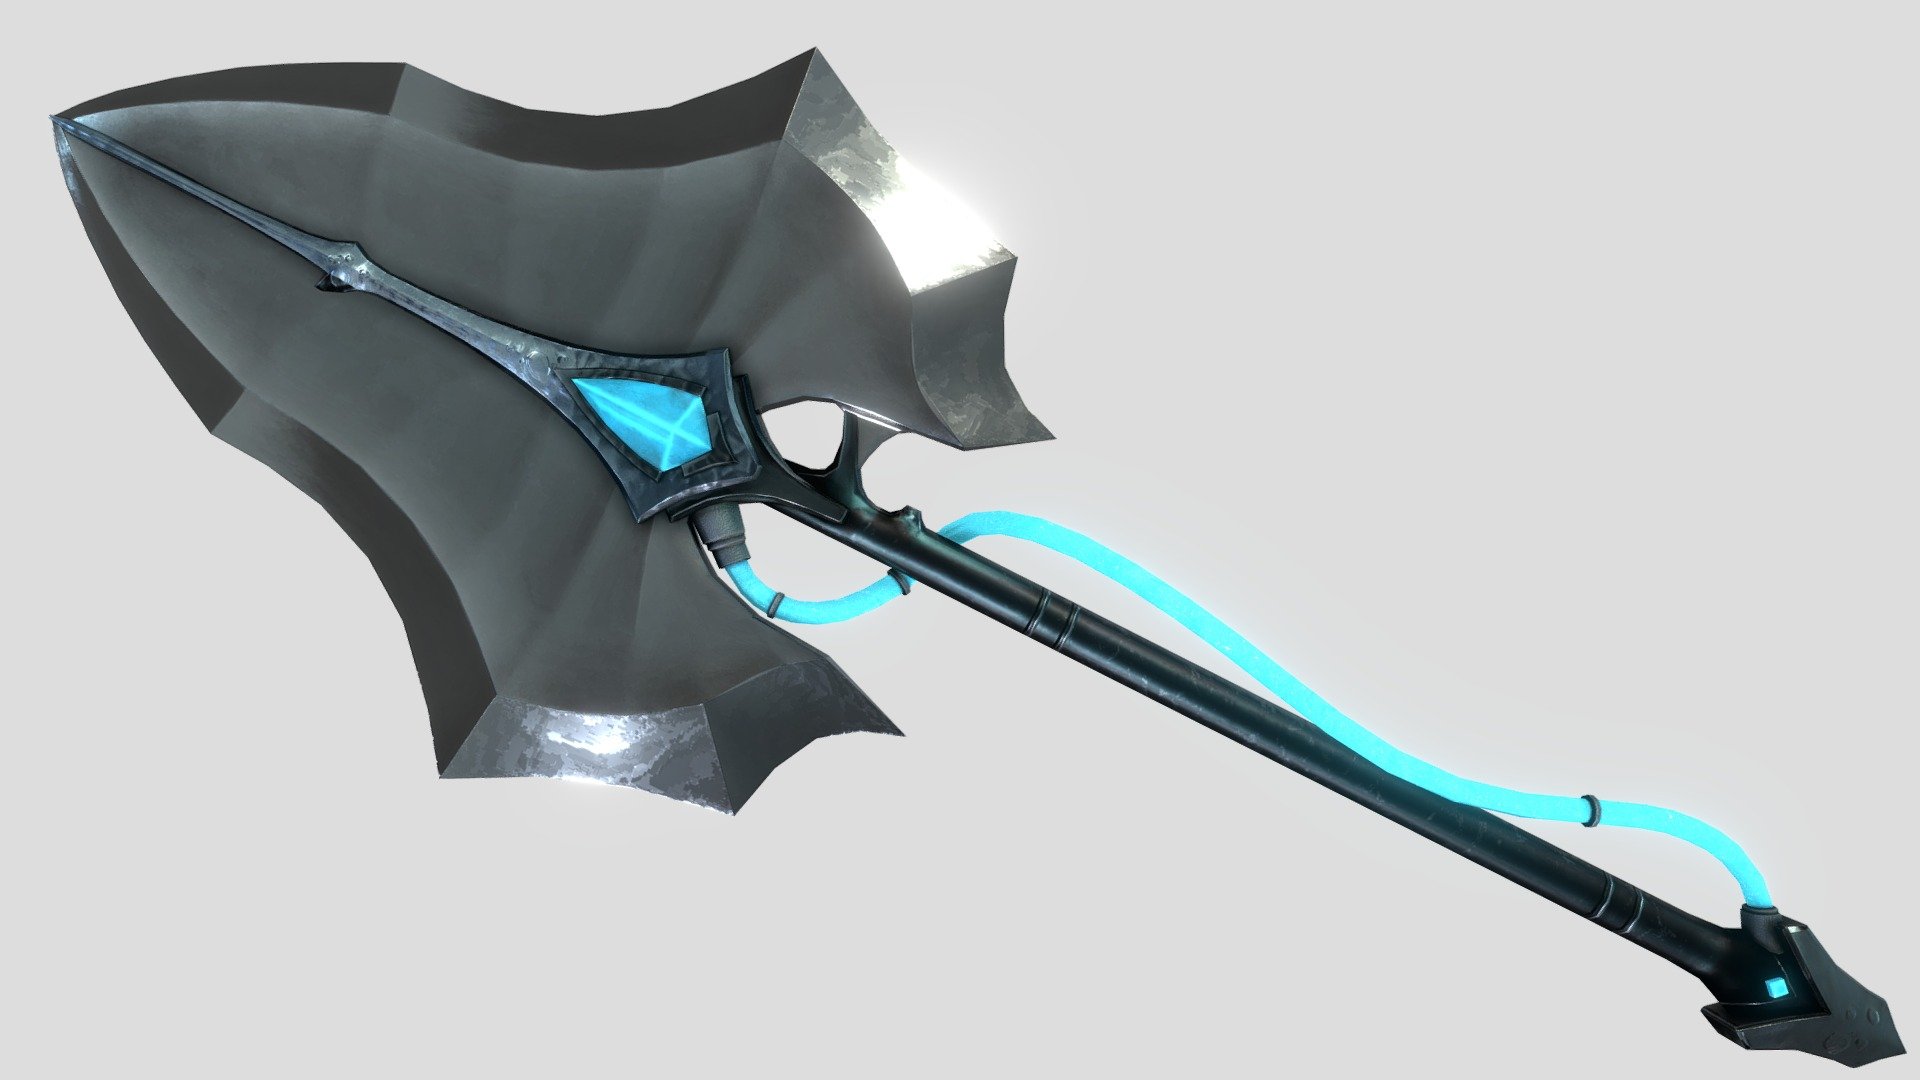 Check my profile for more of the same and follow me to see my future models, if you have any questions comment below or dm me.

About the model: This a double-edged, two-handed fantasy axe, it has a large blue crystal on the middle of its blades which is connected by a tube to the small crystal on the tip of the handle, this small scructure on the tip of the handle is intended to be used as a point of recharge of the weapon.

Topology: 100% tris

Performance: It performs very well in-game, it's a good looking lowpoly, the textures can be down-scaled from their original 4k resolution to 1k and it will still have great quality.

Textures: 4k textures of: Color, Normal, Metallic, Roughness, Ambient occlussion, Curvature, Thickness, Position, Emissive, Height.

UV: Unwraped and organized.

Formats Included: FBX, OBJ, GLB, PLY, STL, USDC, X3D, DAE, ABC, BLEND 3d model